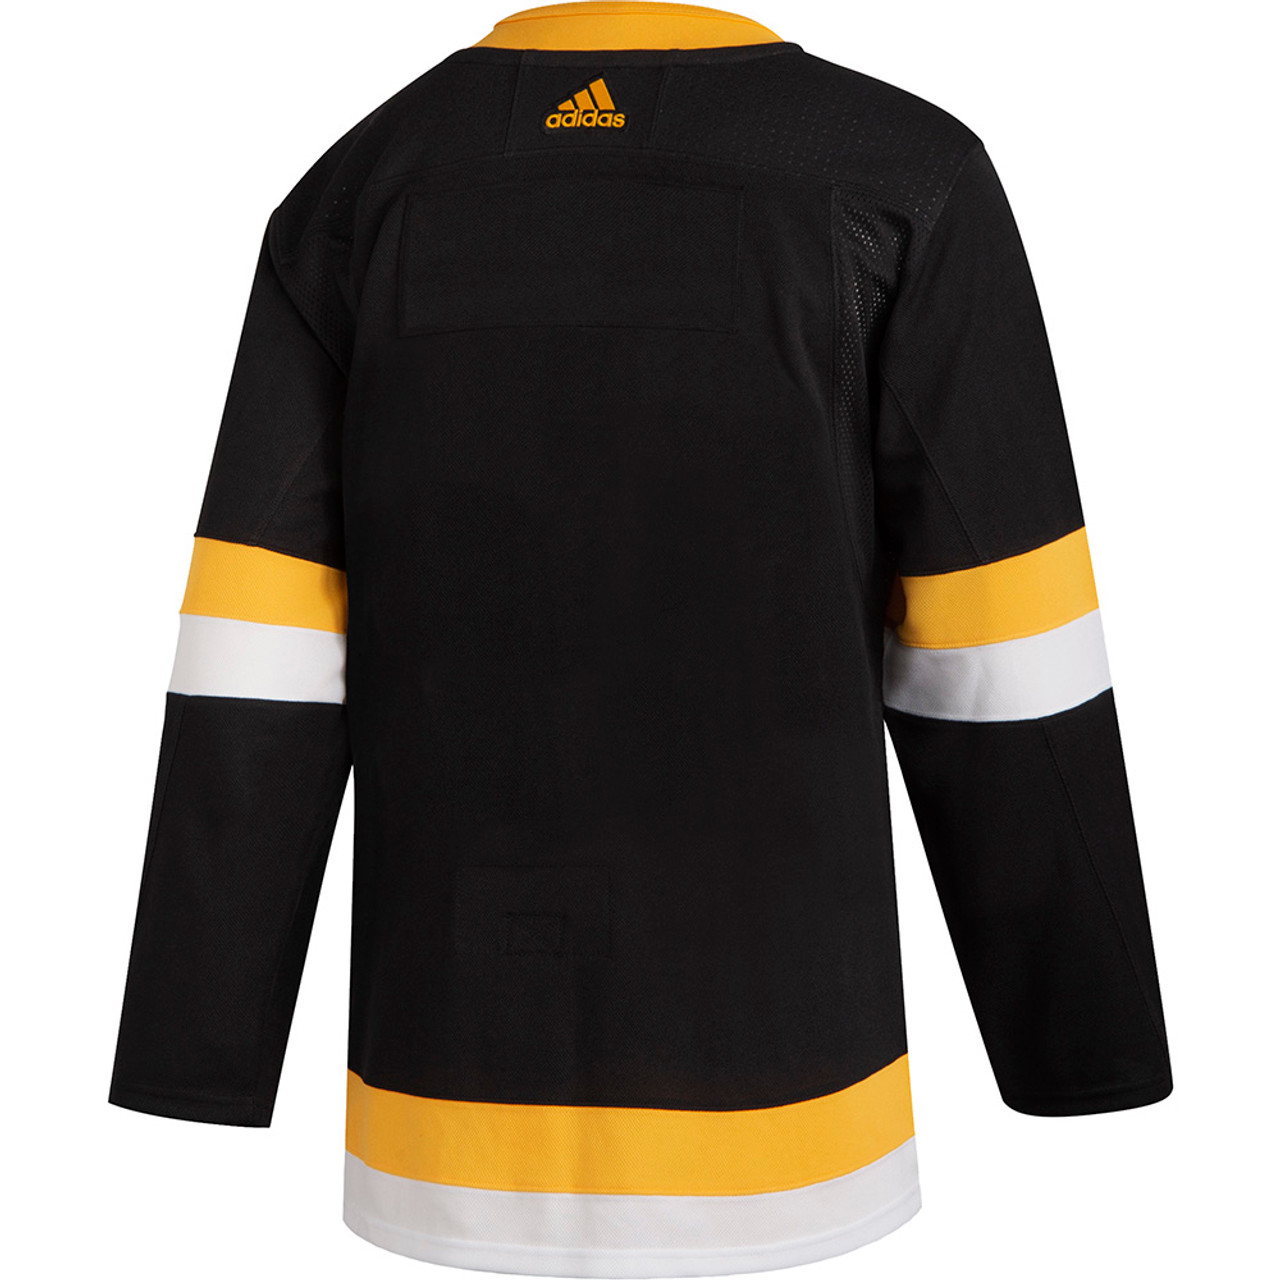 Adidas Pittsburgh Penguins NHL Men's Climalite Authentic Alternate Hockey Jersey